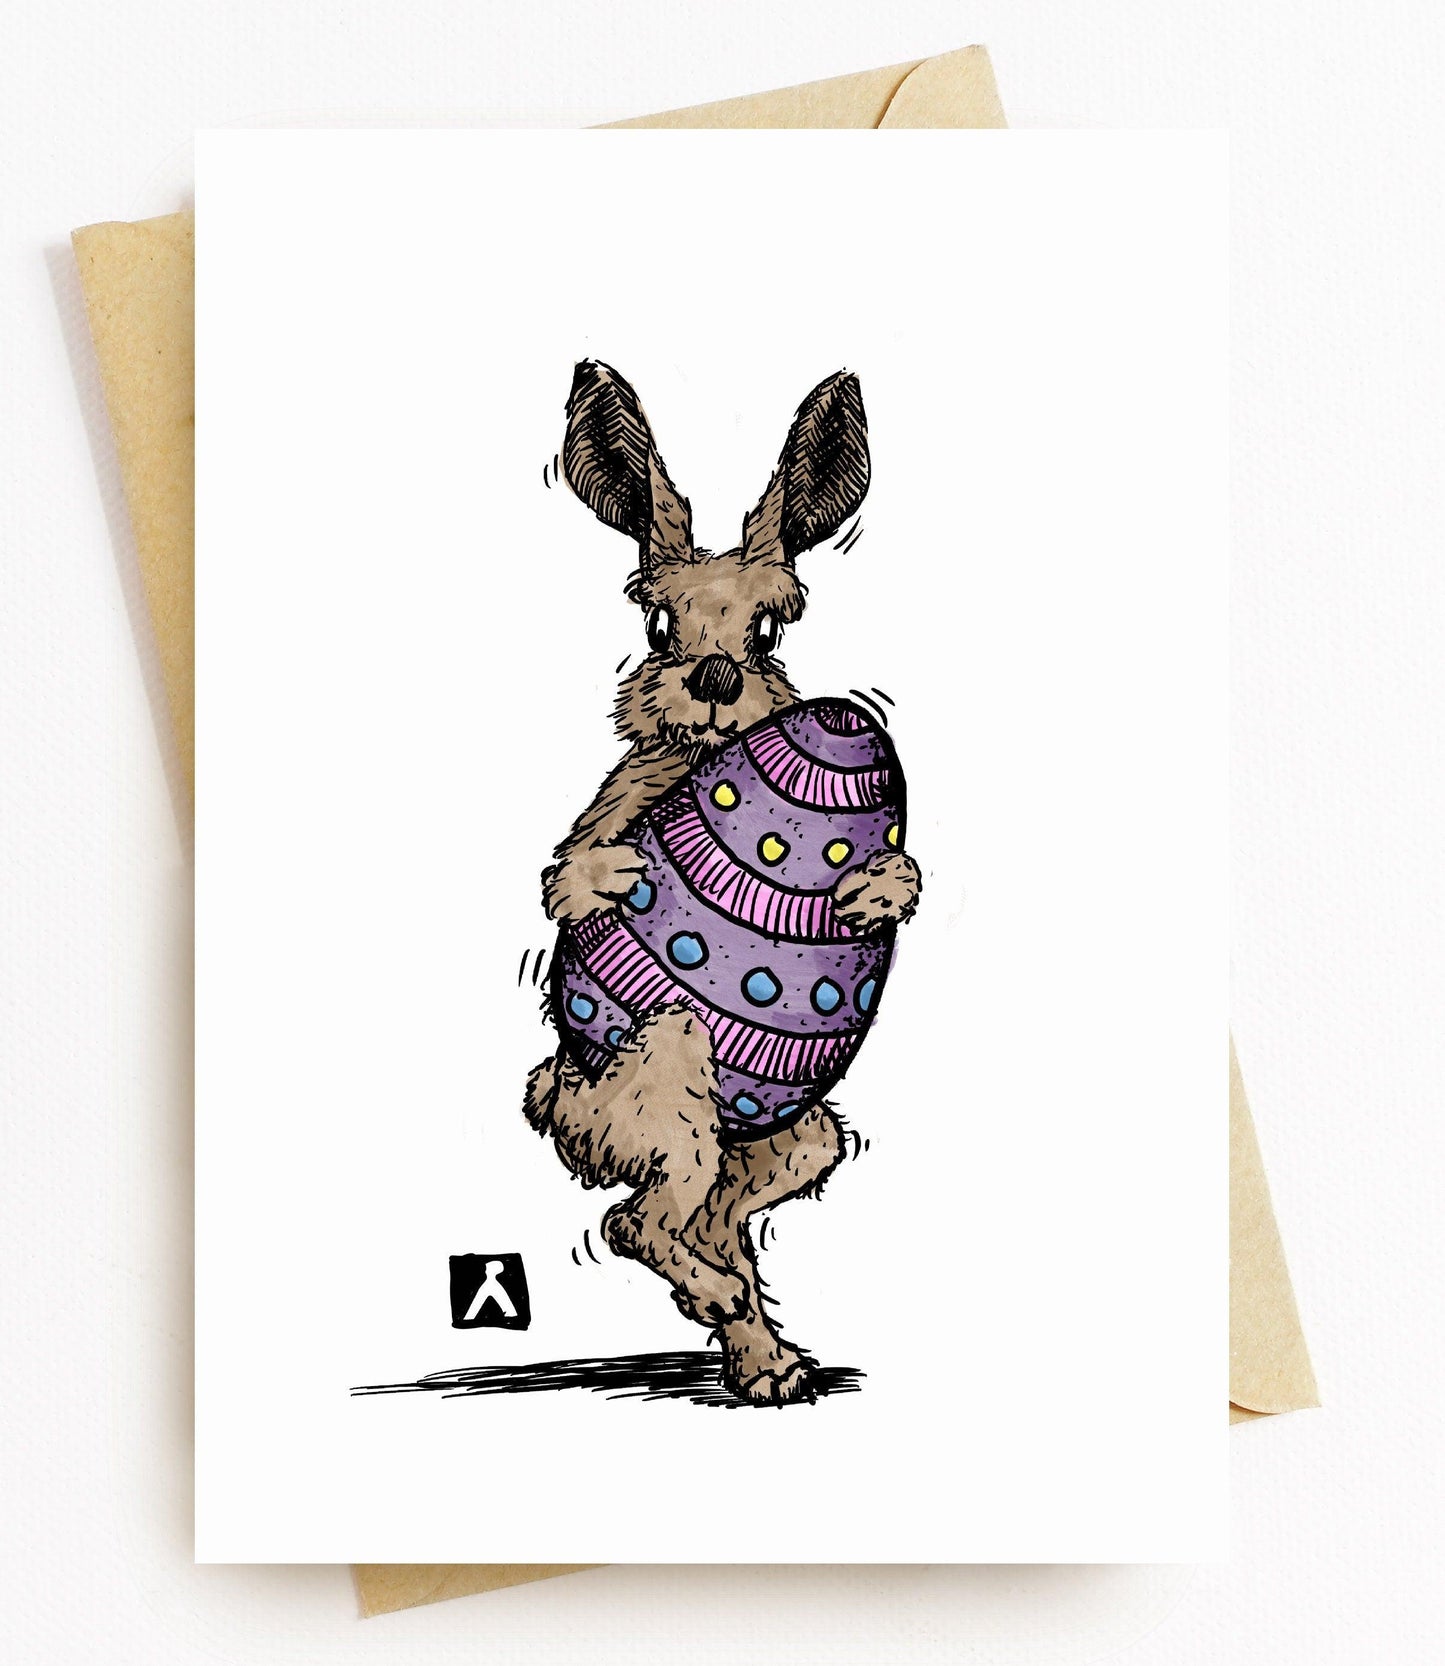 BellavanceInk: Easter Card With Easter Bunny Struggling To Hold An Easter Egg 5 x 7 Inches - BellavanceInk